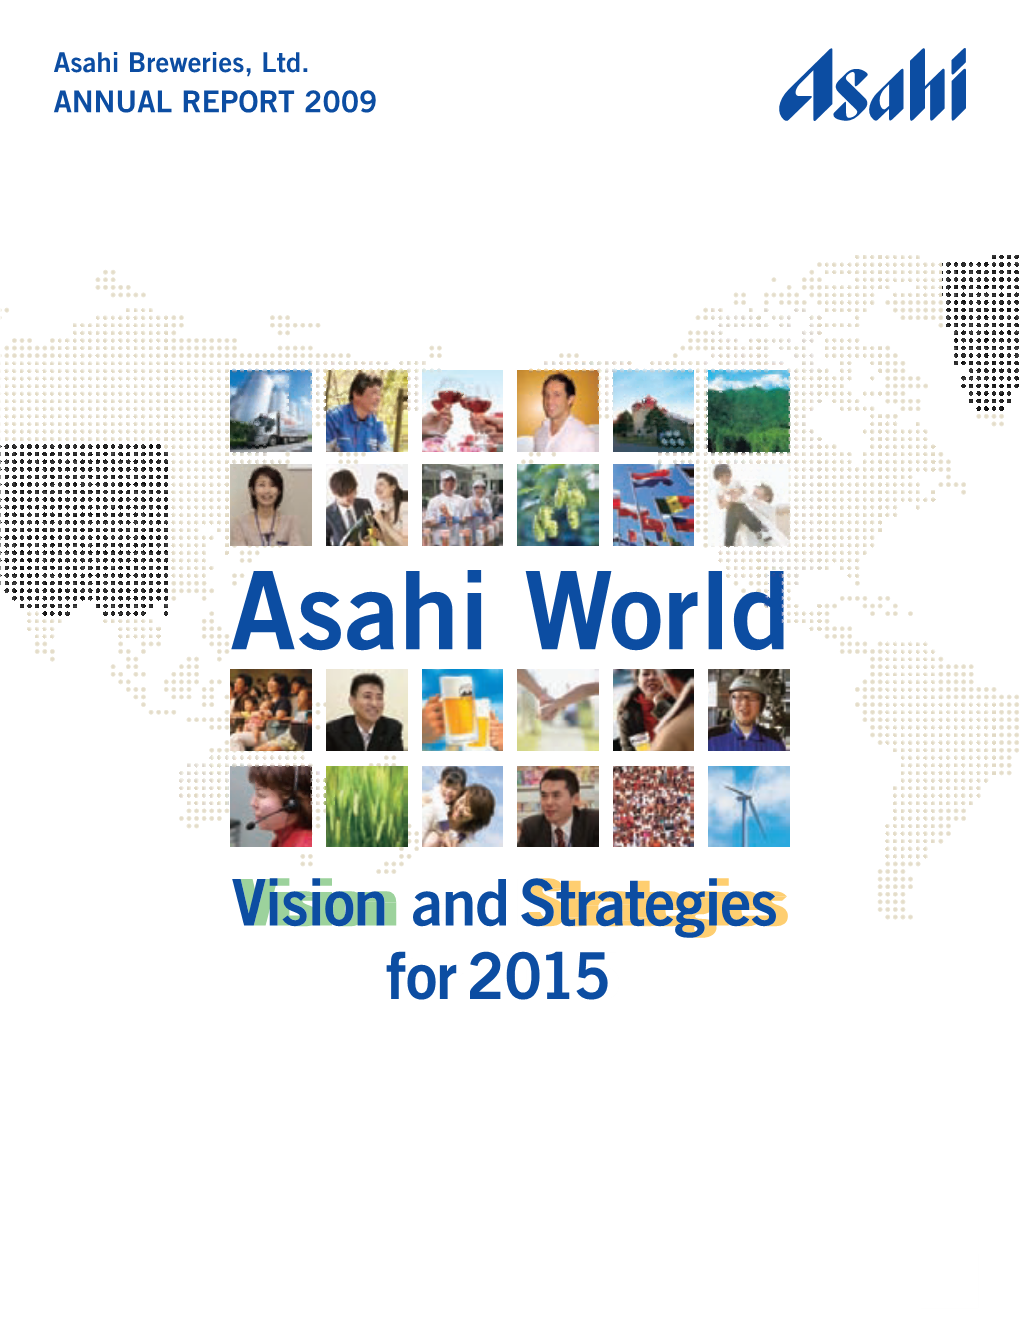 Asahi World for More IR Information, Please Contact Our Investor Relations Office (Public Relations Department)